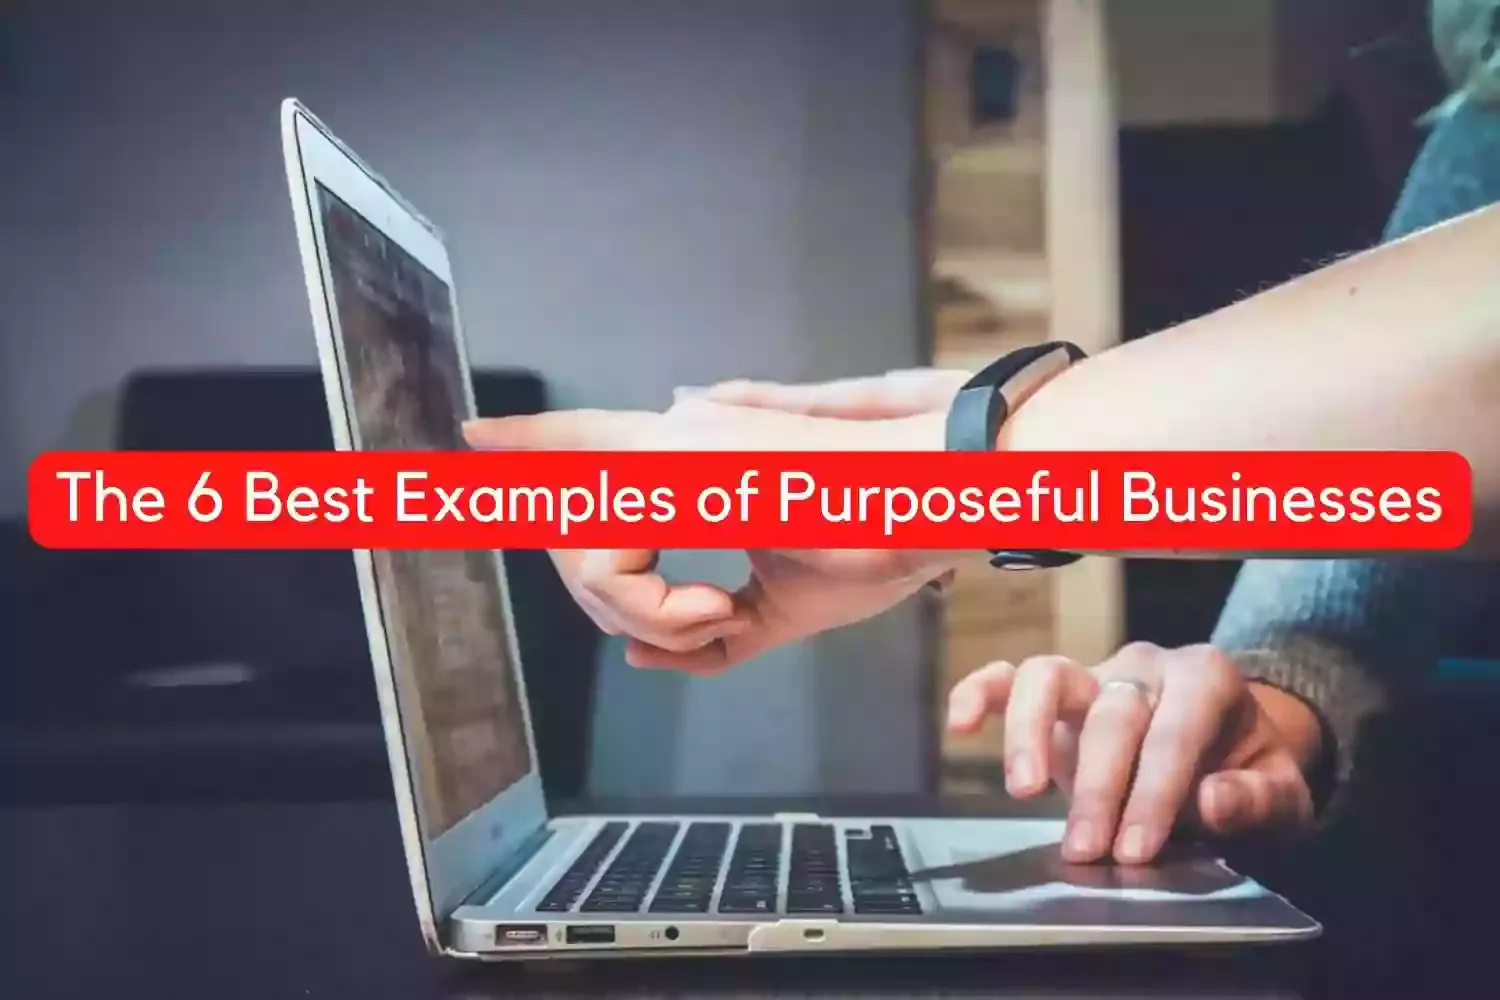 The 6 Best Examples of Purposeful Businesses